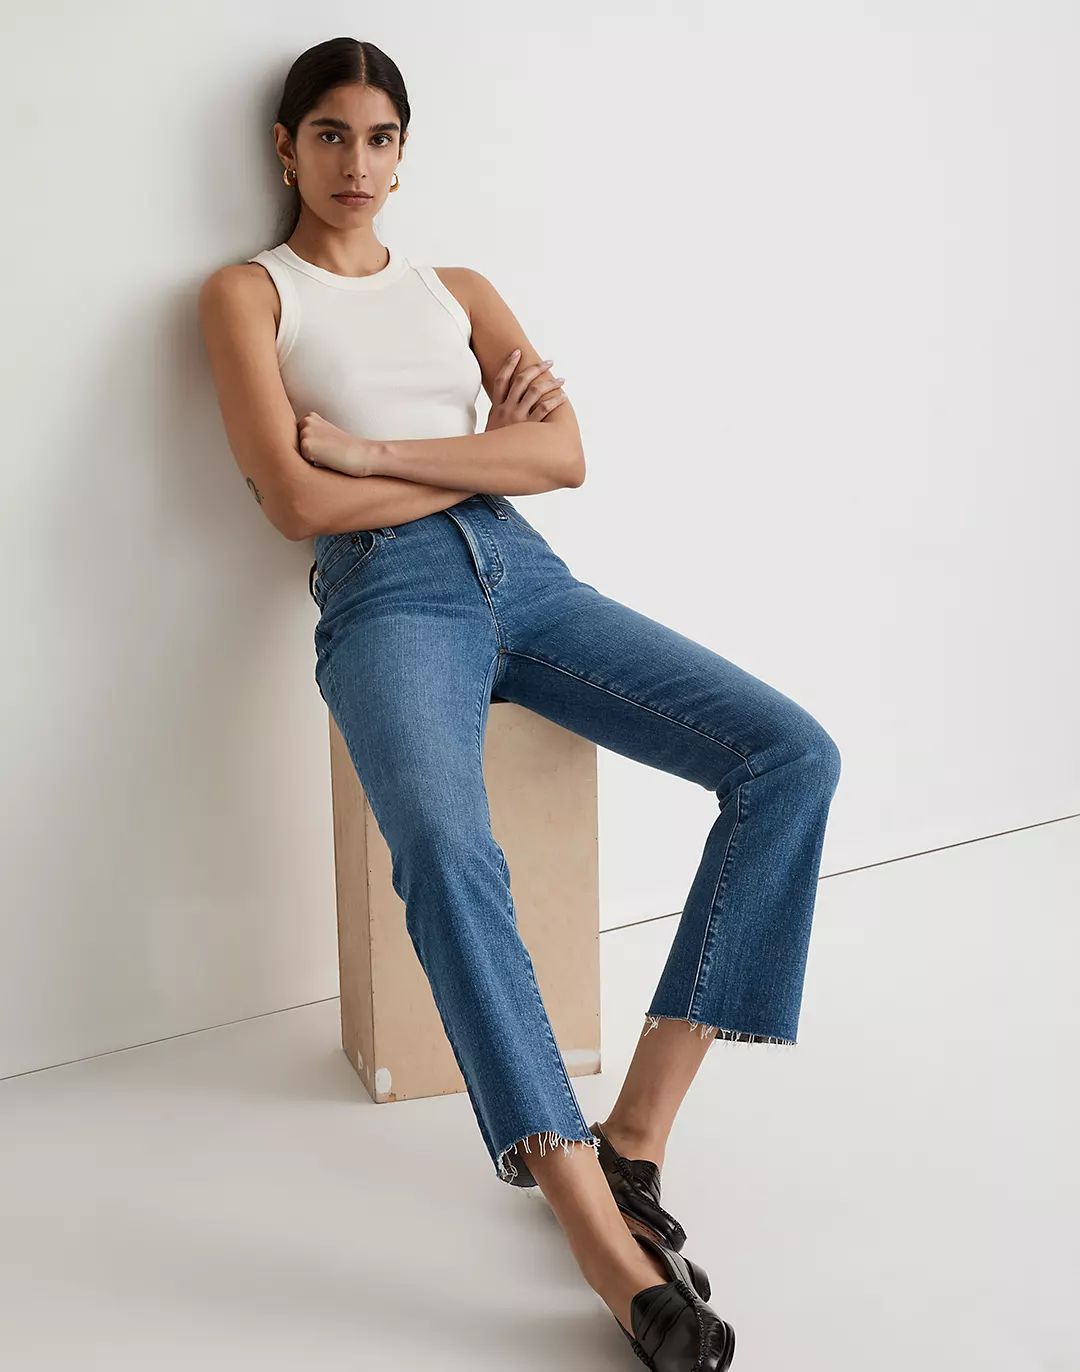 Kick Out Crop Jeans in Cherryville Wash: Raw-Hem Edition | Madewell